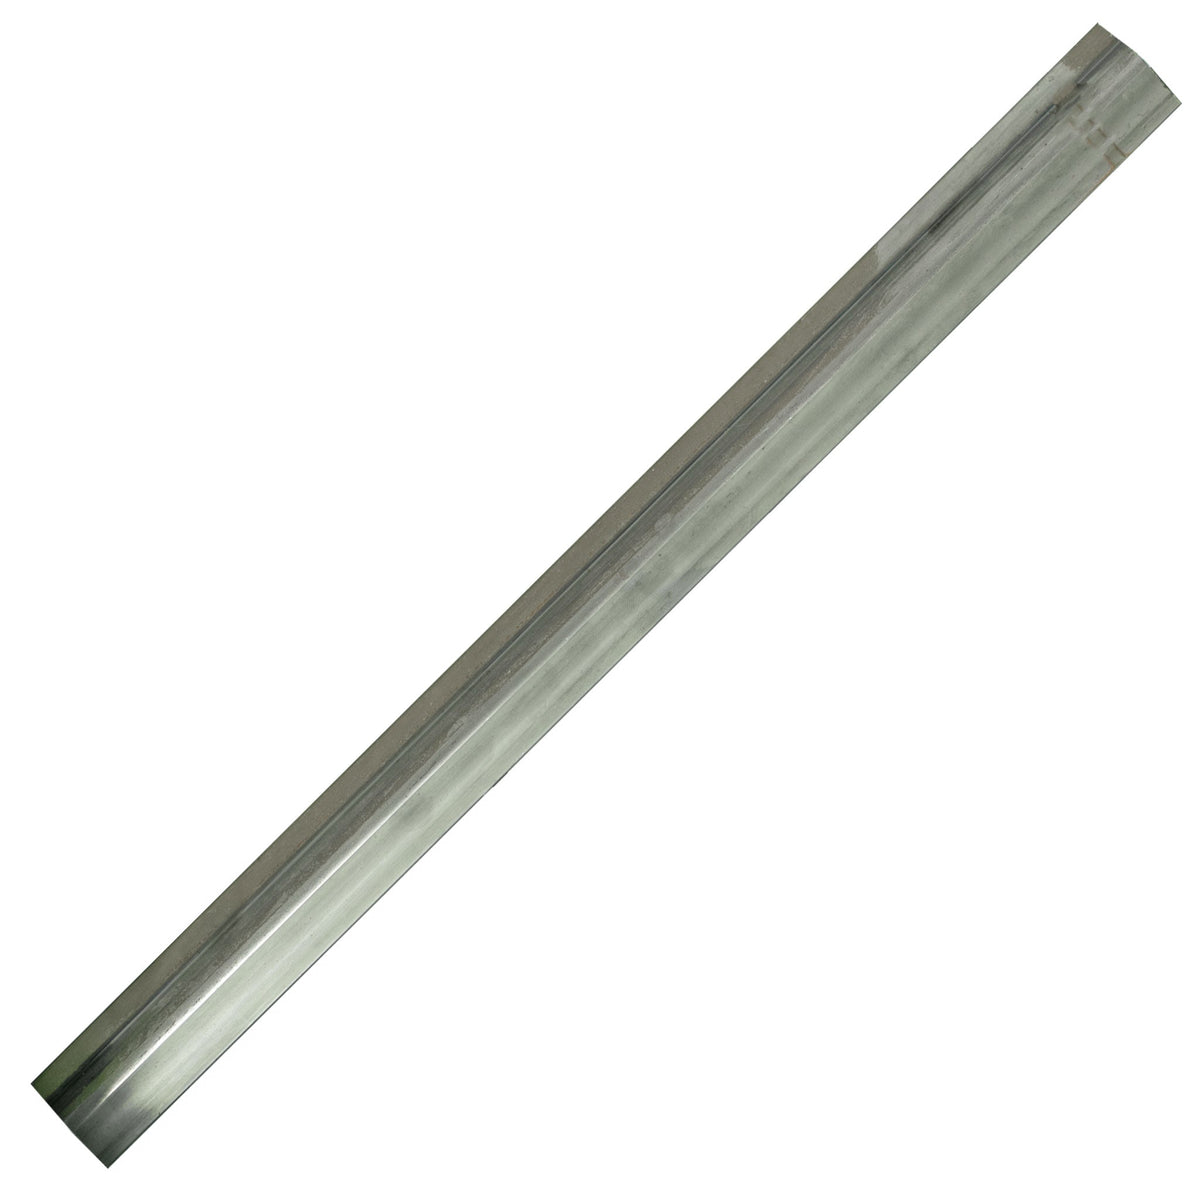 Square Tube Steel A36 1/8in Thick Wall on Sale now from Lee Display